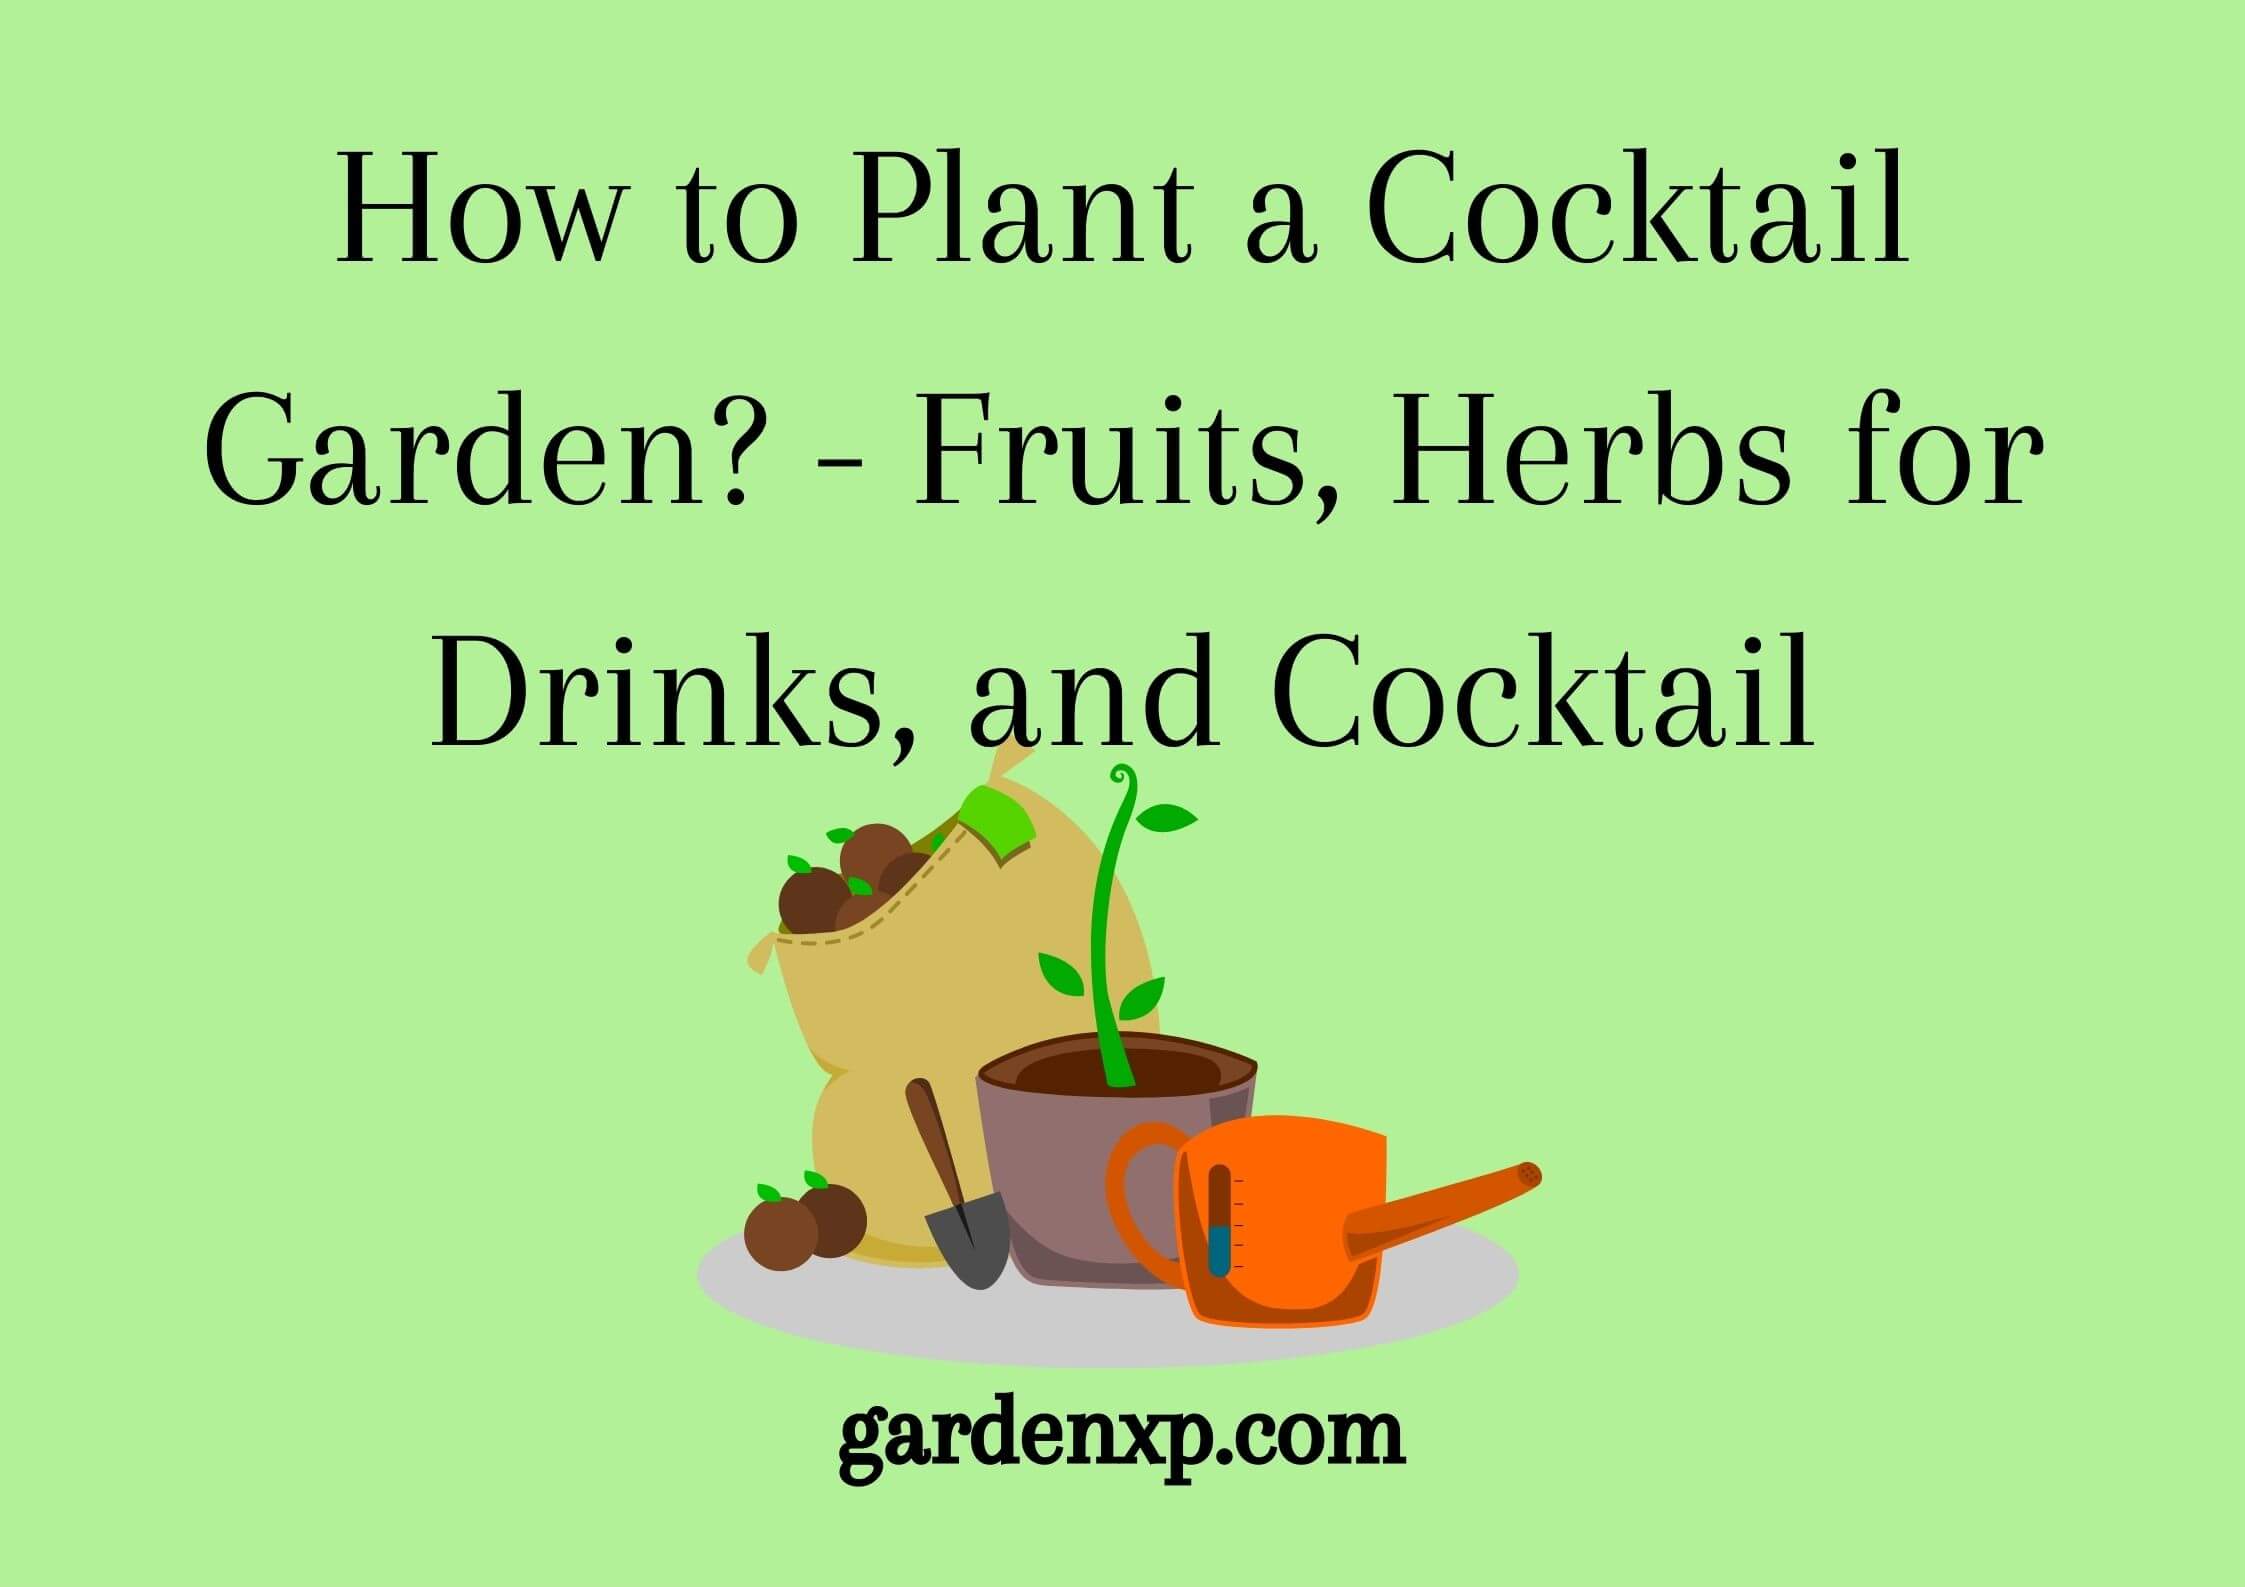 How to Plant a Cocktail Garden? - Fruits Herbs for Drinks and Cocktail